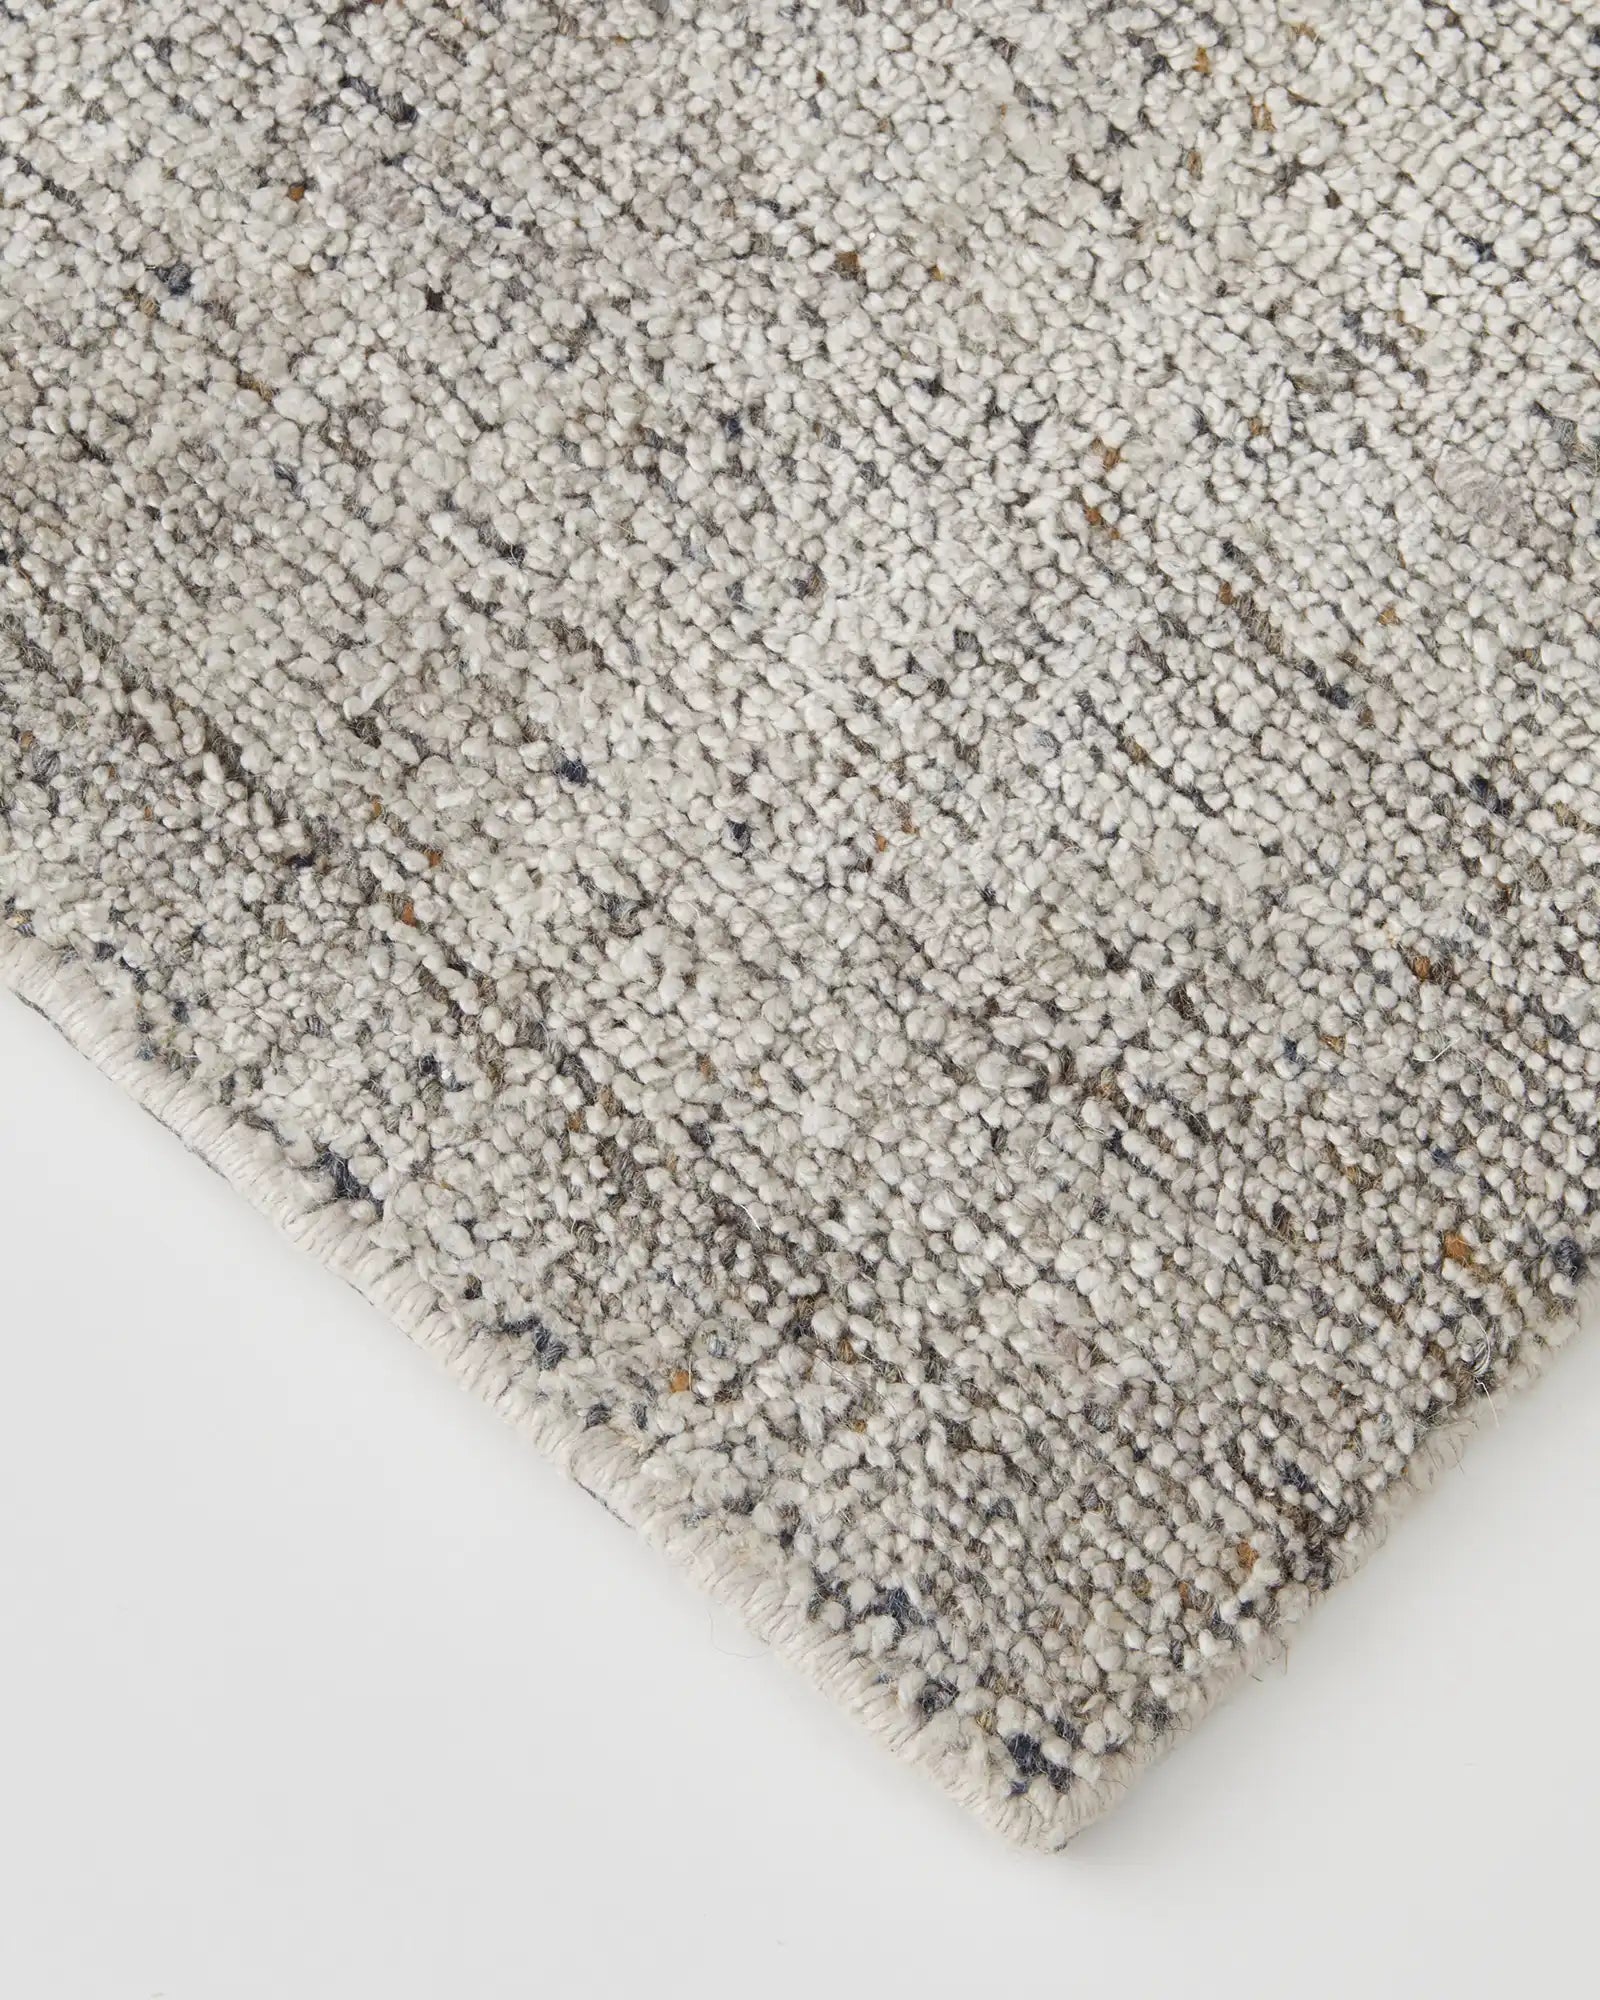 Detail of the rug's edge showing the precise loom-knotted craftsmanship and quality finish."